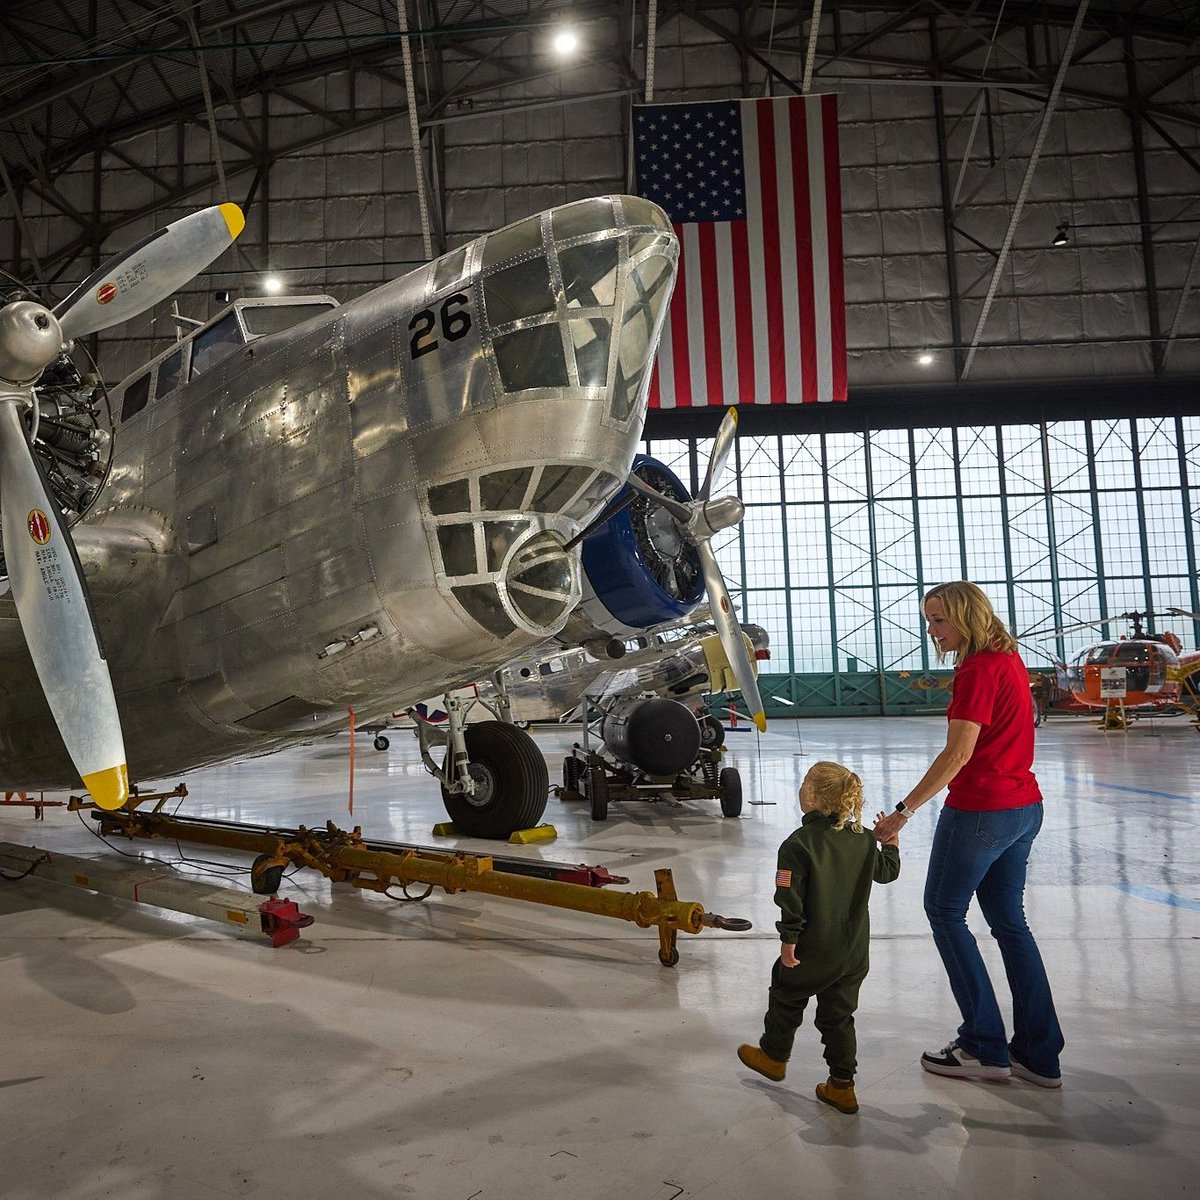 Celebrate with Mom at Wings Over the Rockies! Mom gets in FREE at both Wings locations on Mother’s Day, Sunday, May 12 from 12pm-5pm

Bring the whole family and make special memories together as you explore the wonders of aviation and space.

#wingsmuseum #mothersday #momsfreeday